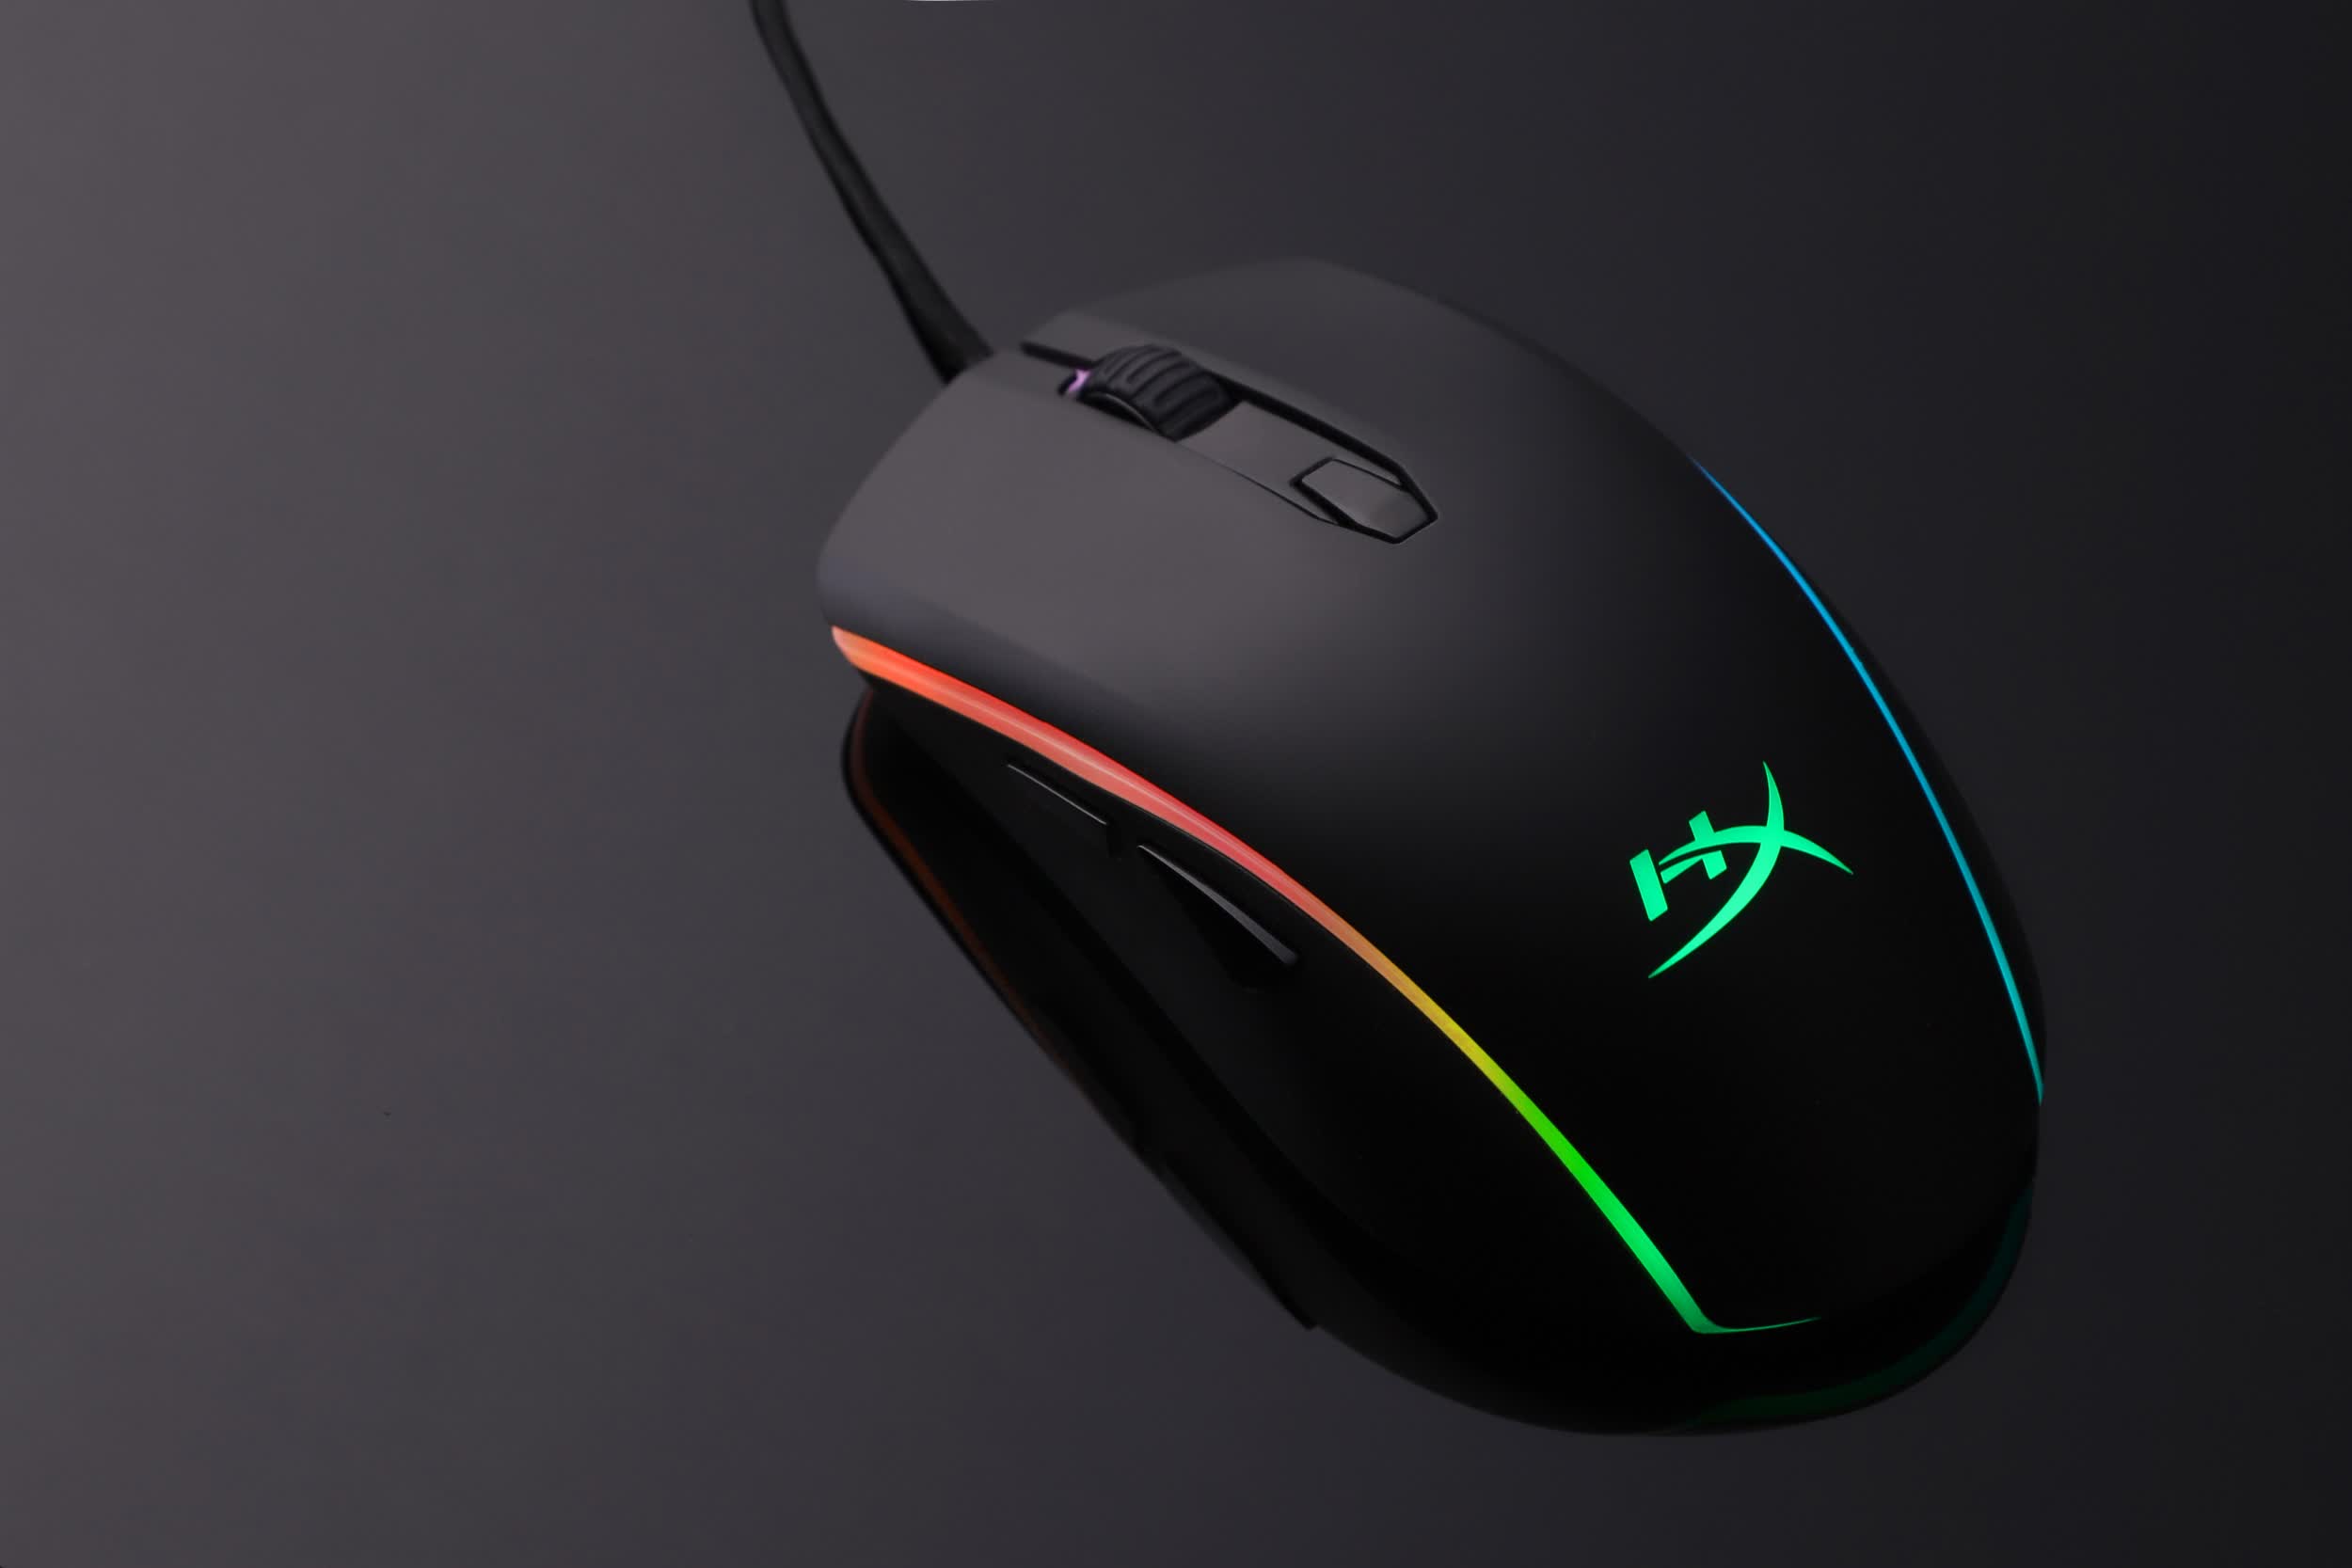 Amazon's HyperX sale includes keyboards, mice and headsets at up to 36 percent off